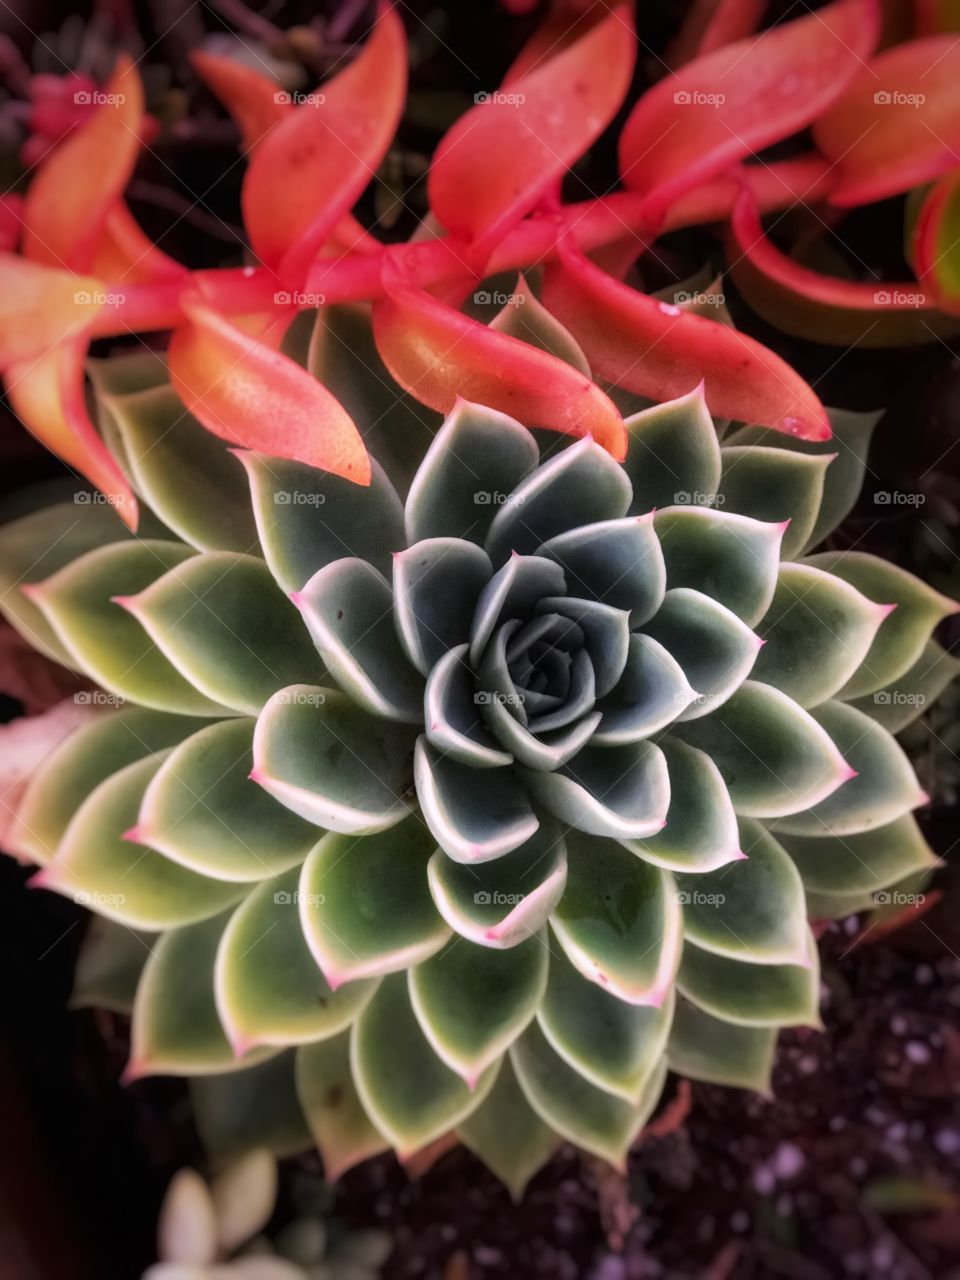 Color Love Foap Mission! Stunning Close Shot Bright and Colorful Succulents 